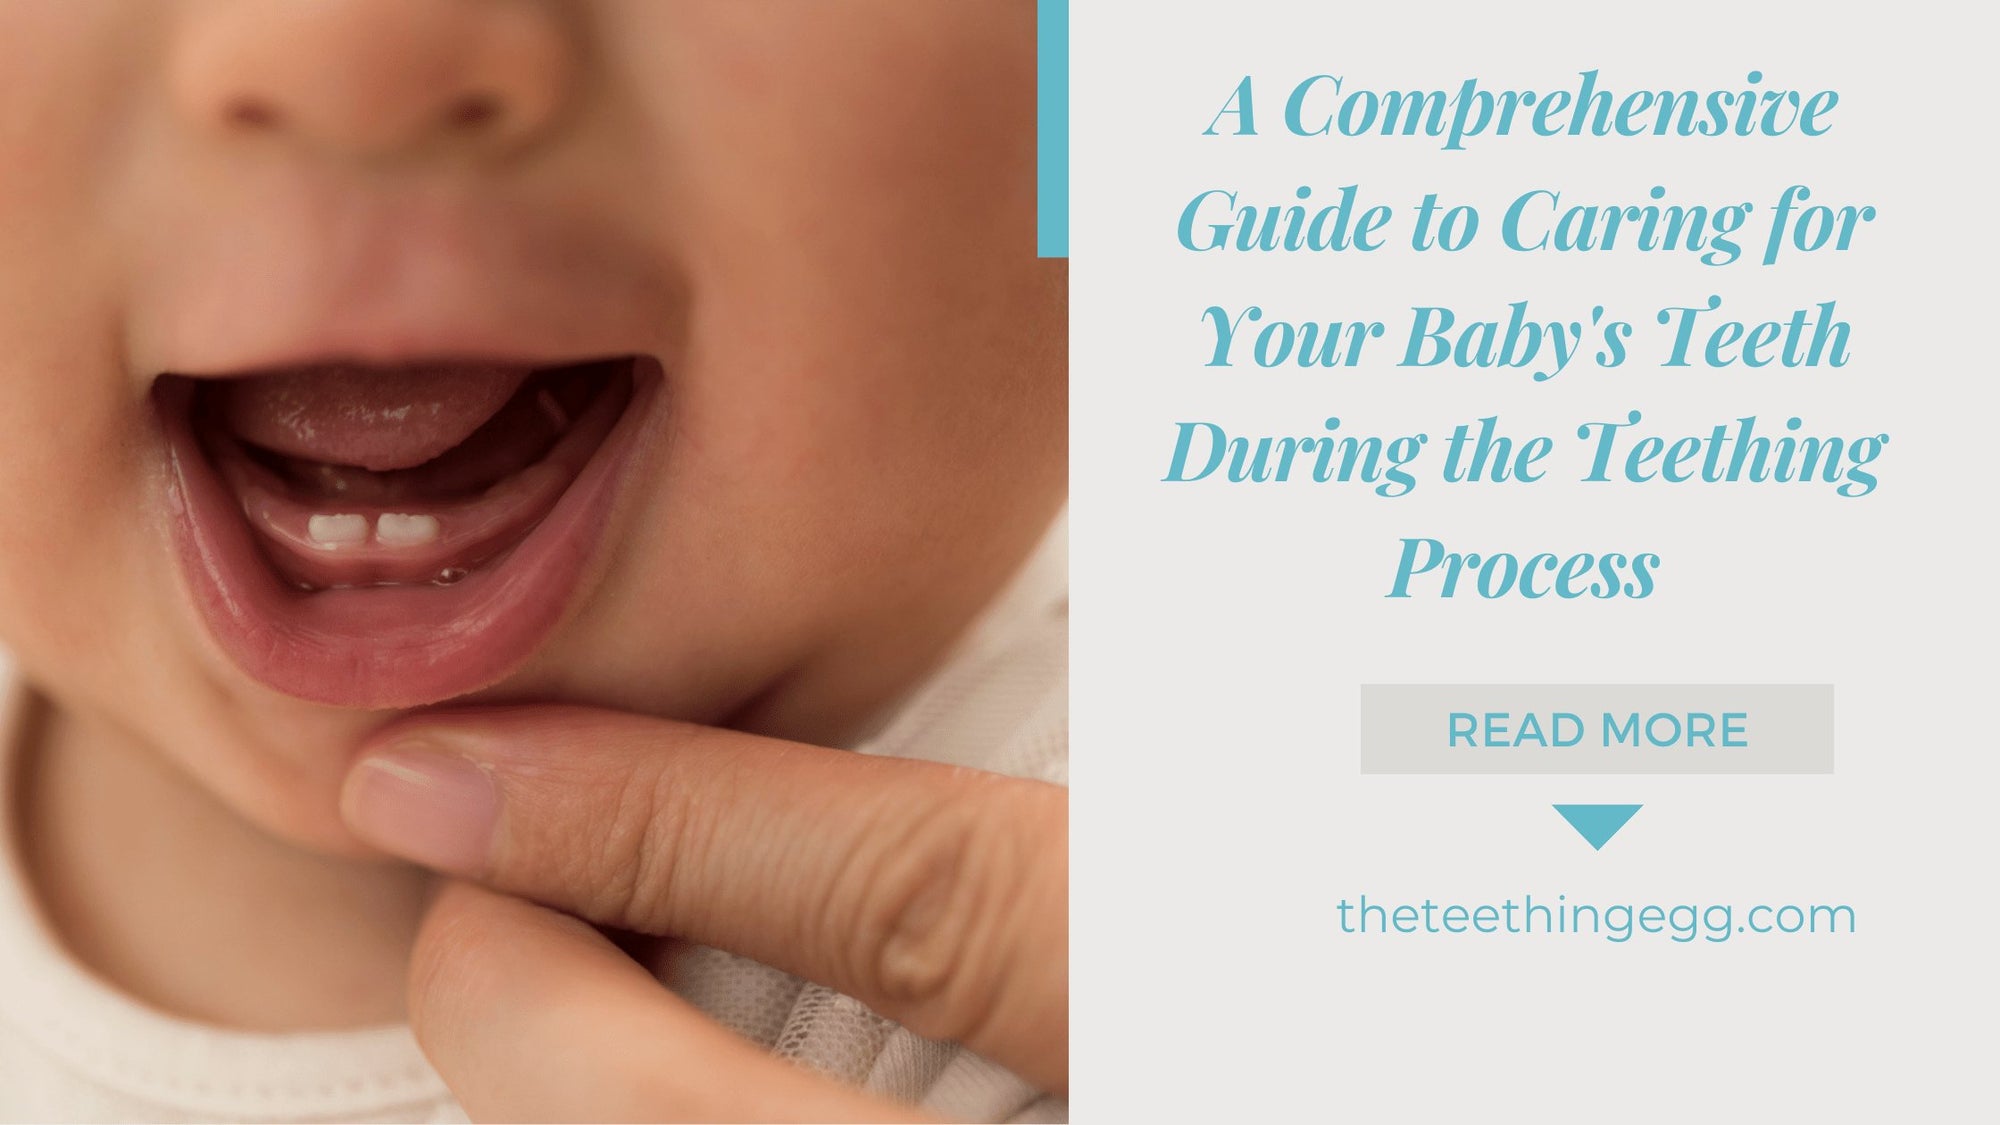 Caring for Your Baby's Teeth During the Teething Process